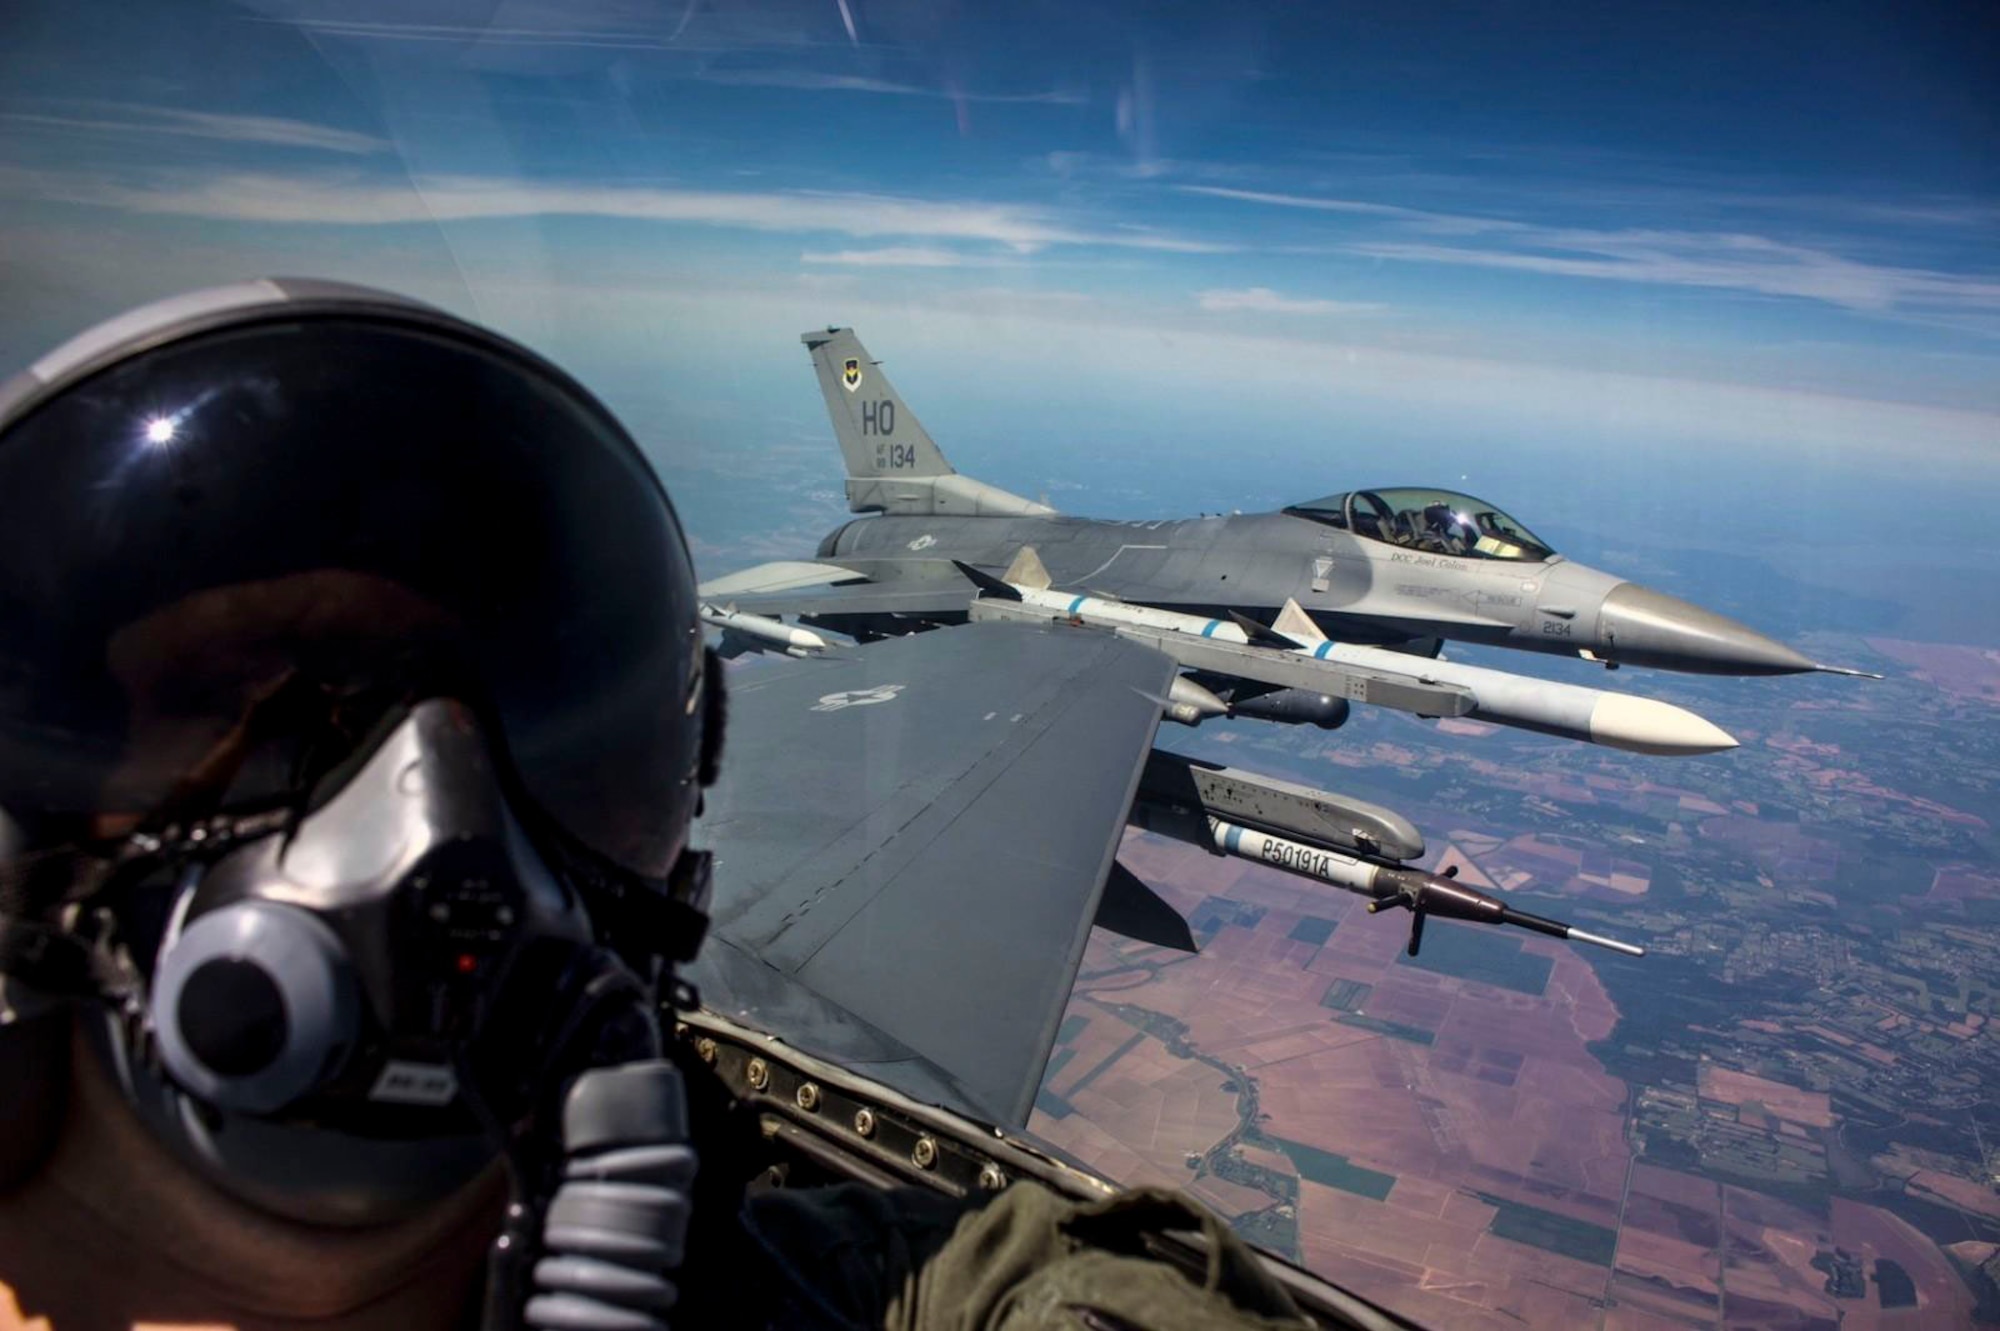 U.S. Air Force Senior Airman George Rahe, 54th Operations Support Squadron Aircrew Flight Equipment Airman, takes a selfie during a familiarization flight in an F-16 Fighting Falcon during a temporary duty assignment with the 8th Fighter Squadron, March 29, 2019 to April 12, 2019, at Naval Air Station Joint Reserve Base New Orleans, La. Many personnel were given the opportunity to go on a FAM ride in the back of an F-16 D-model during the TDY. (Courtesy photo by Senior Airman George Rahe)